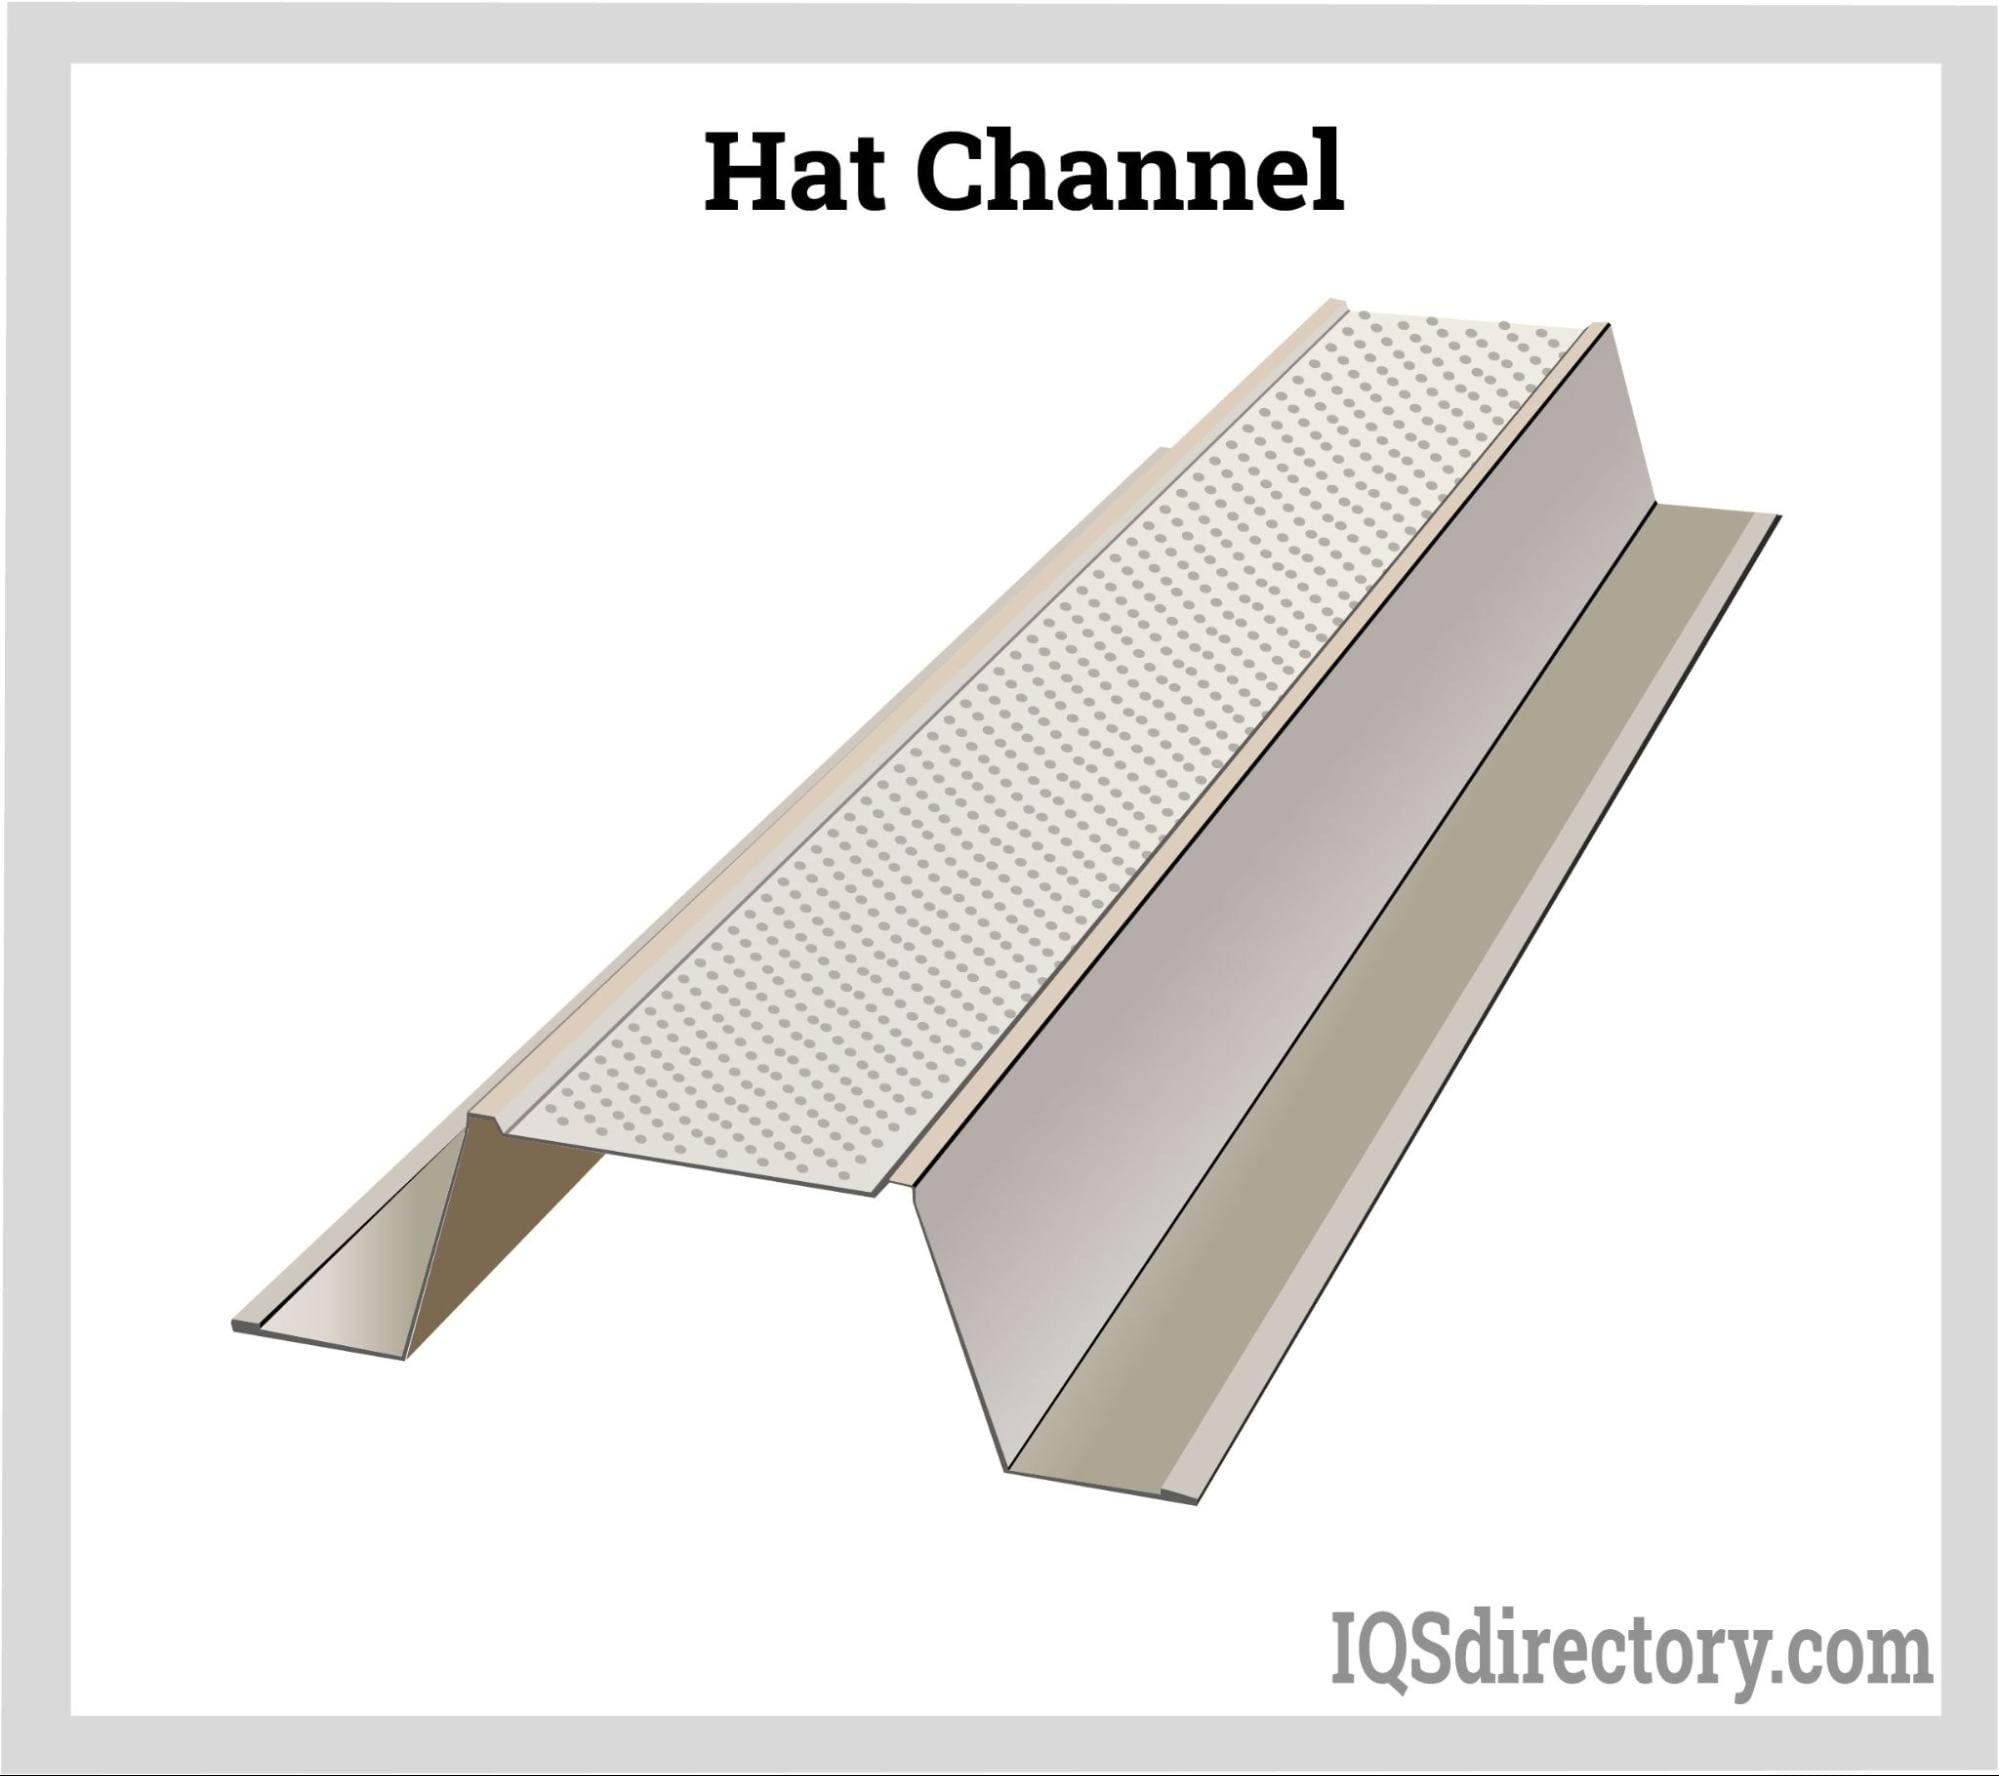 Hat Channel